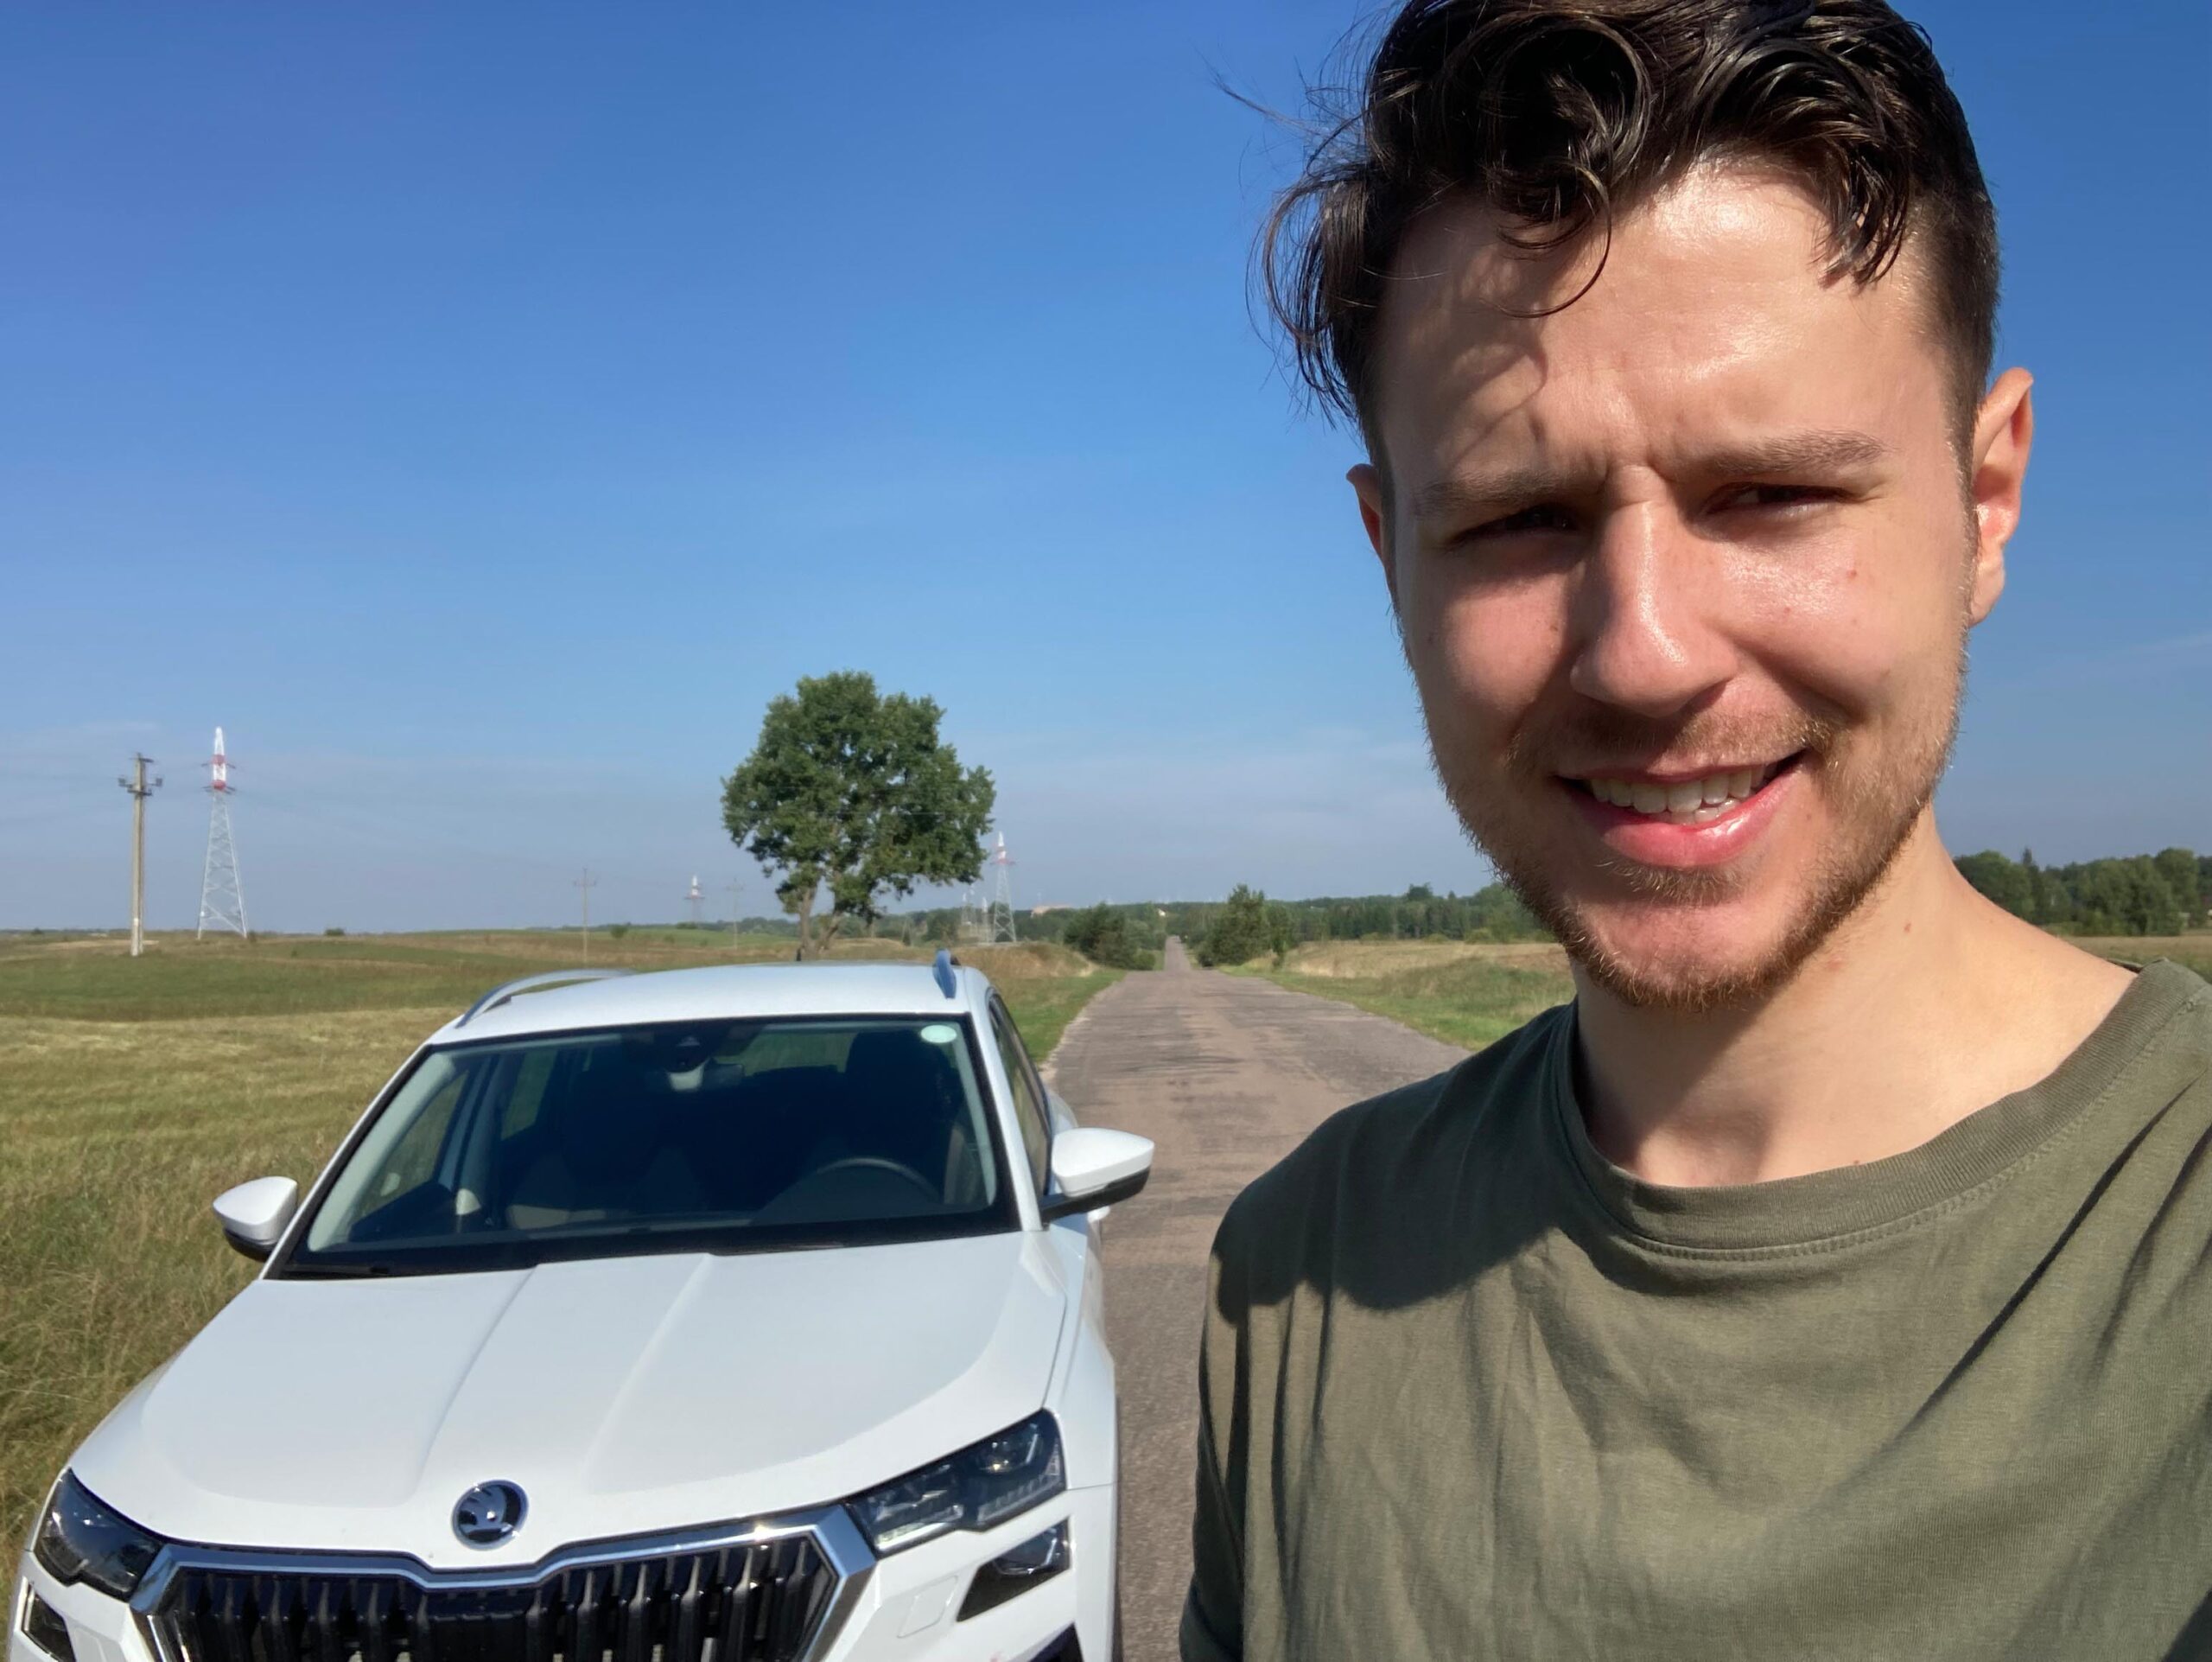 Poland Insiders writer Jeremy is renting a car in Poland